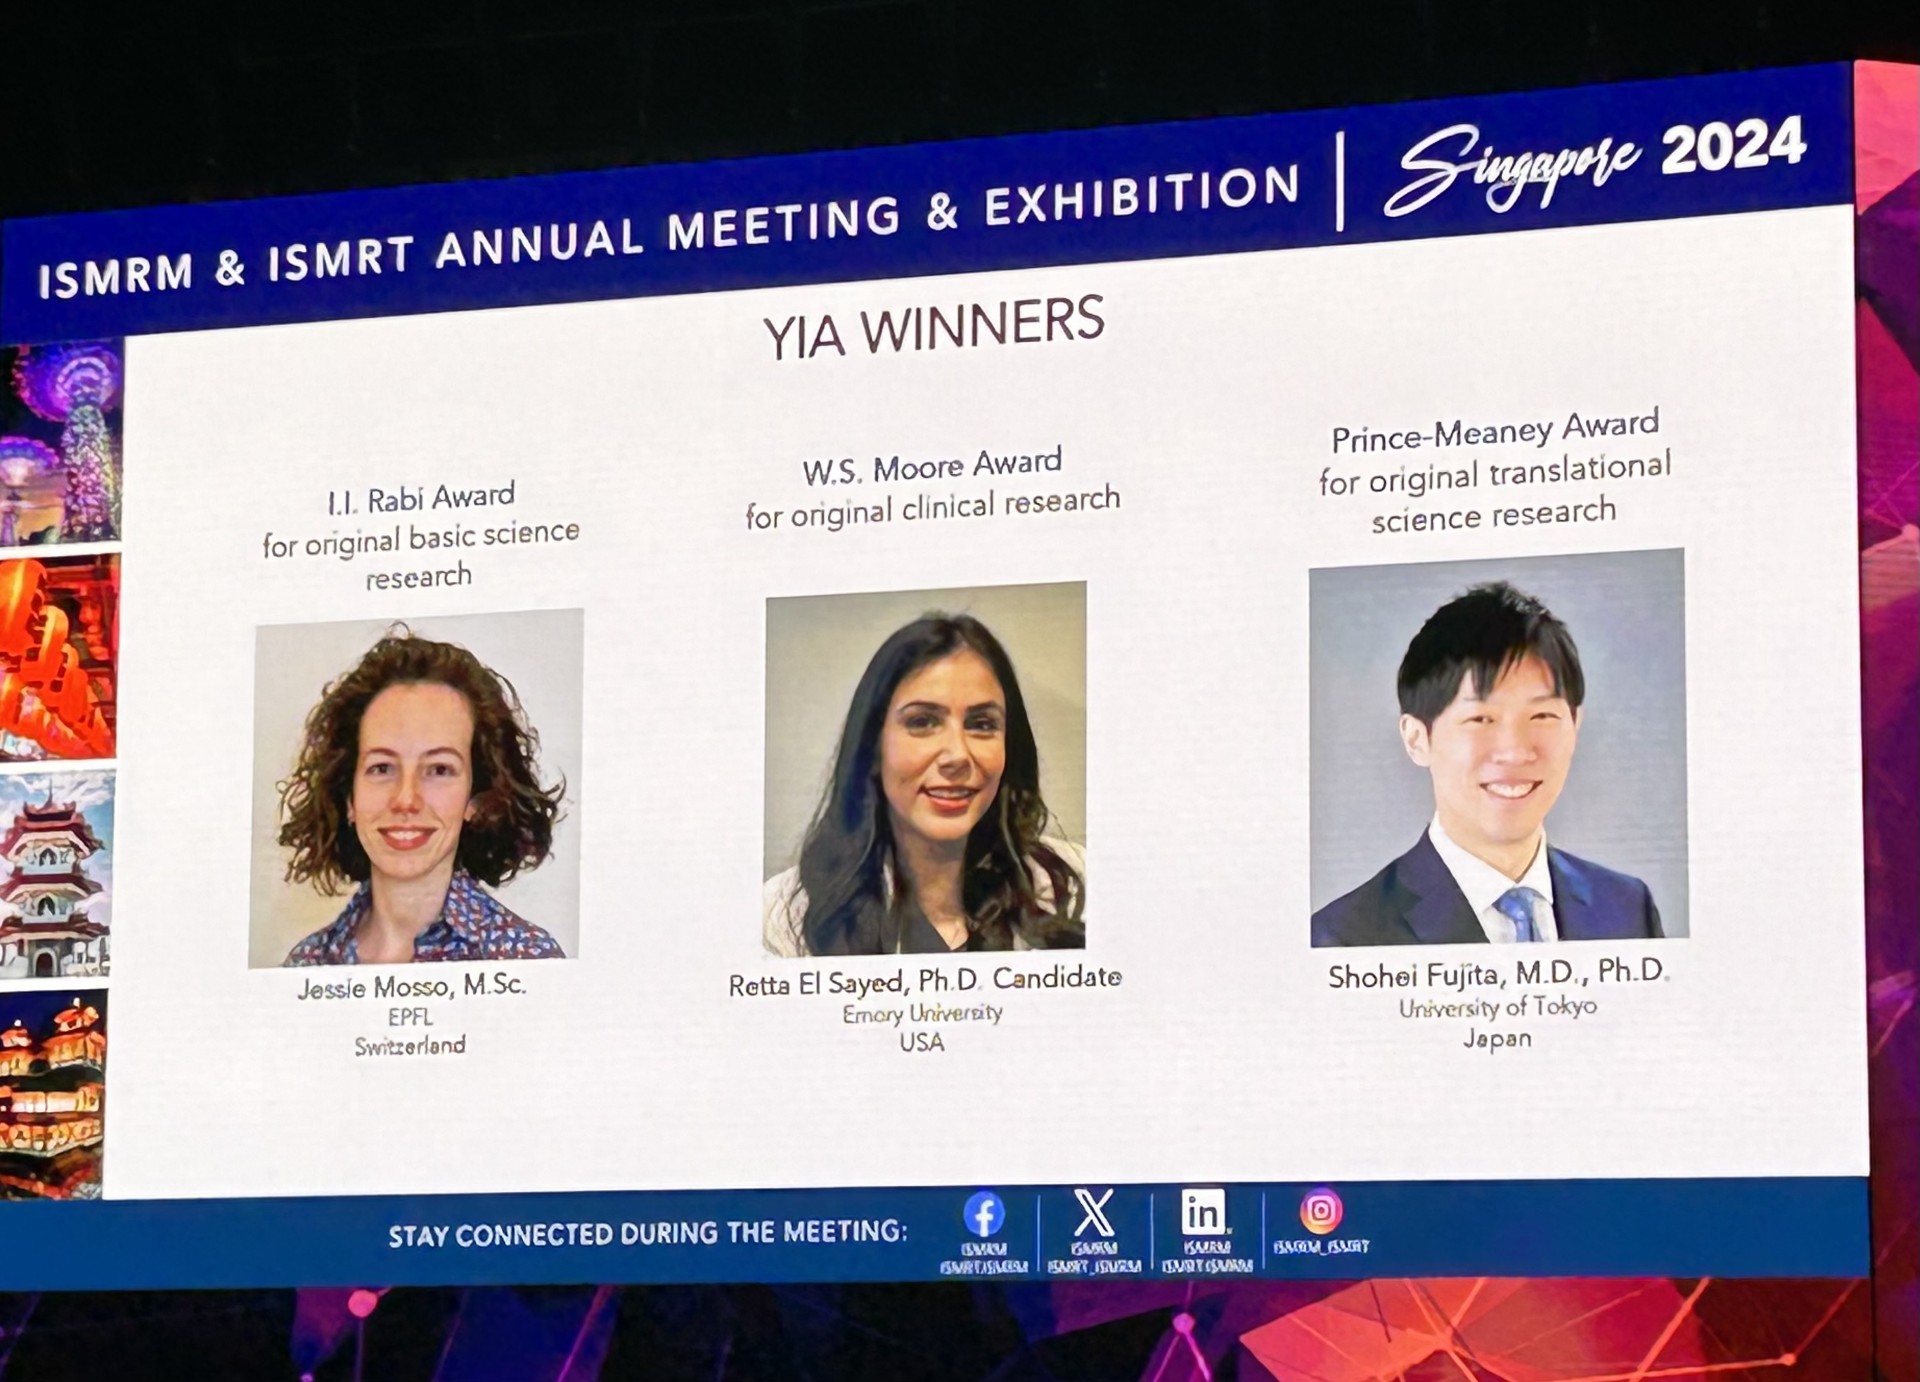 Photo of a large projection screen featuring the winners of the Young Investigators Award. Retta El Sayed's photo is in the middle flanked by another female student photo on the left and a male student photo on the right.